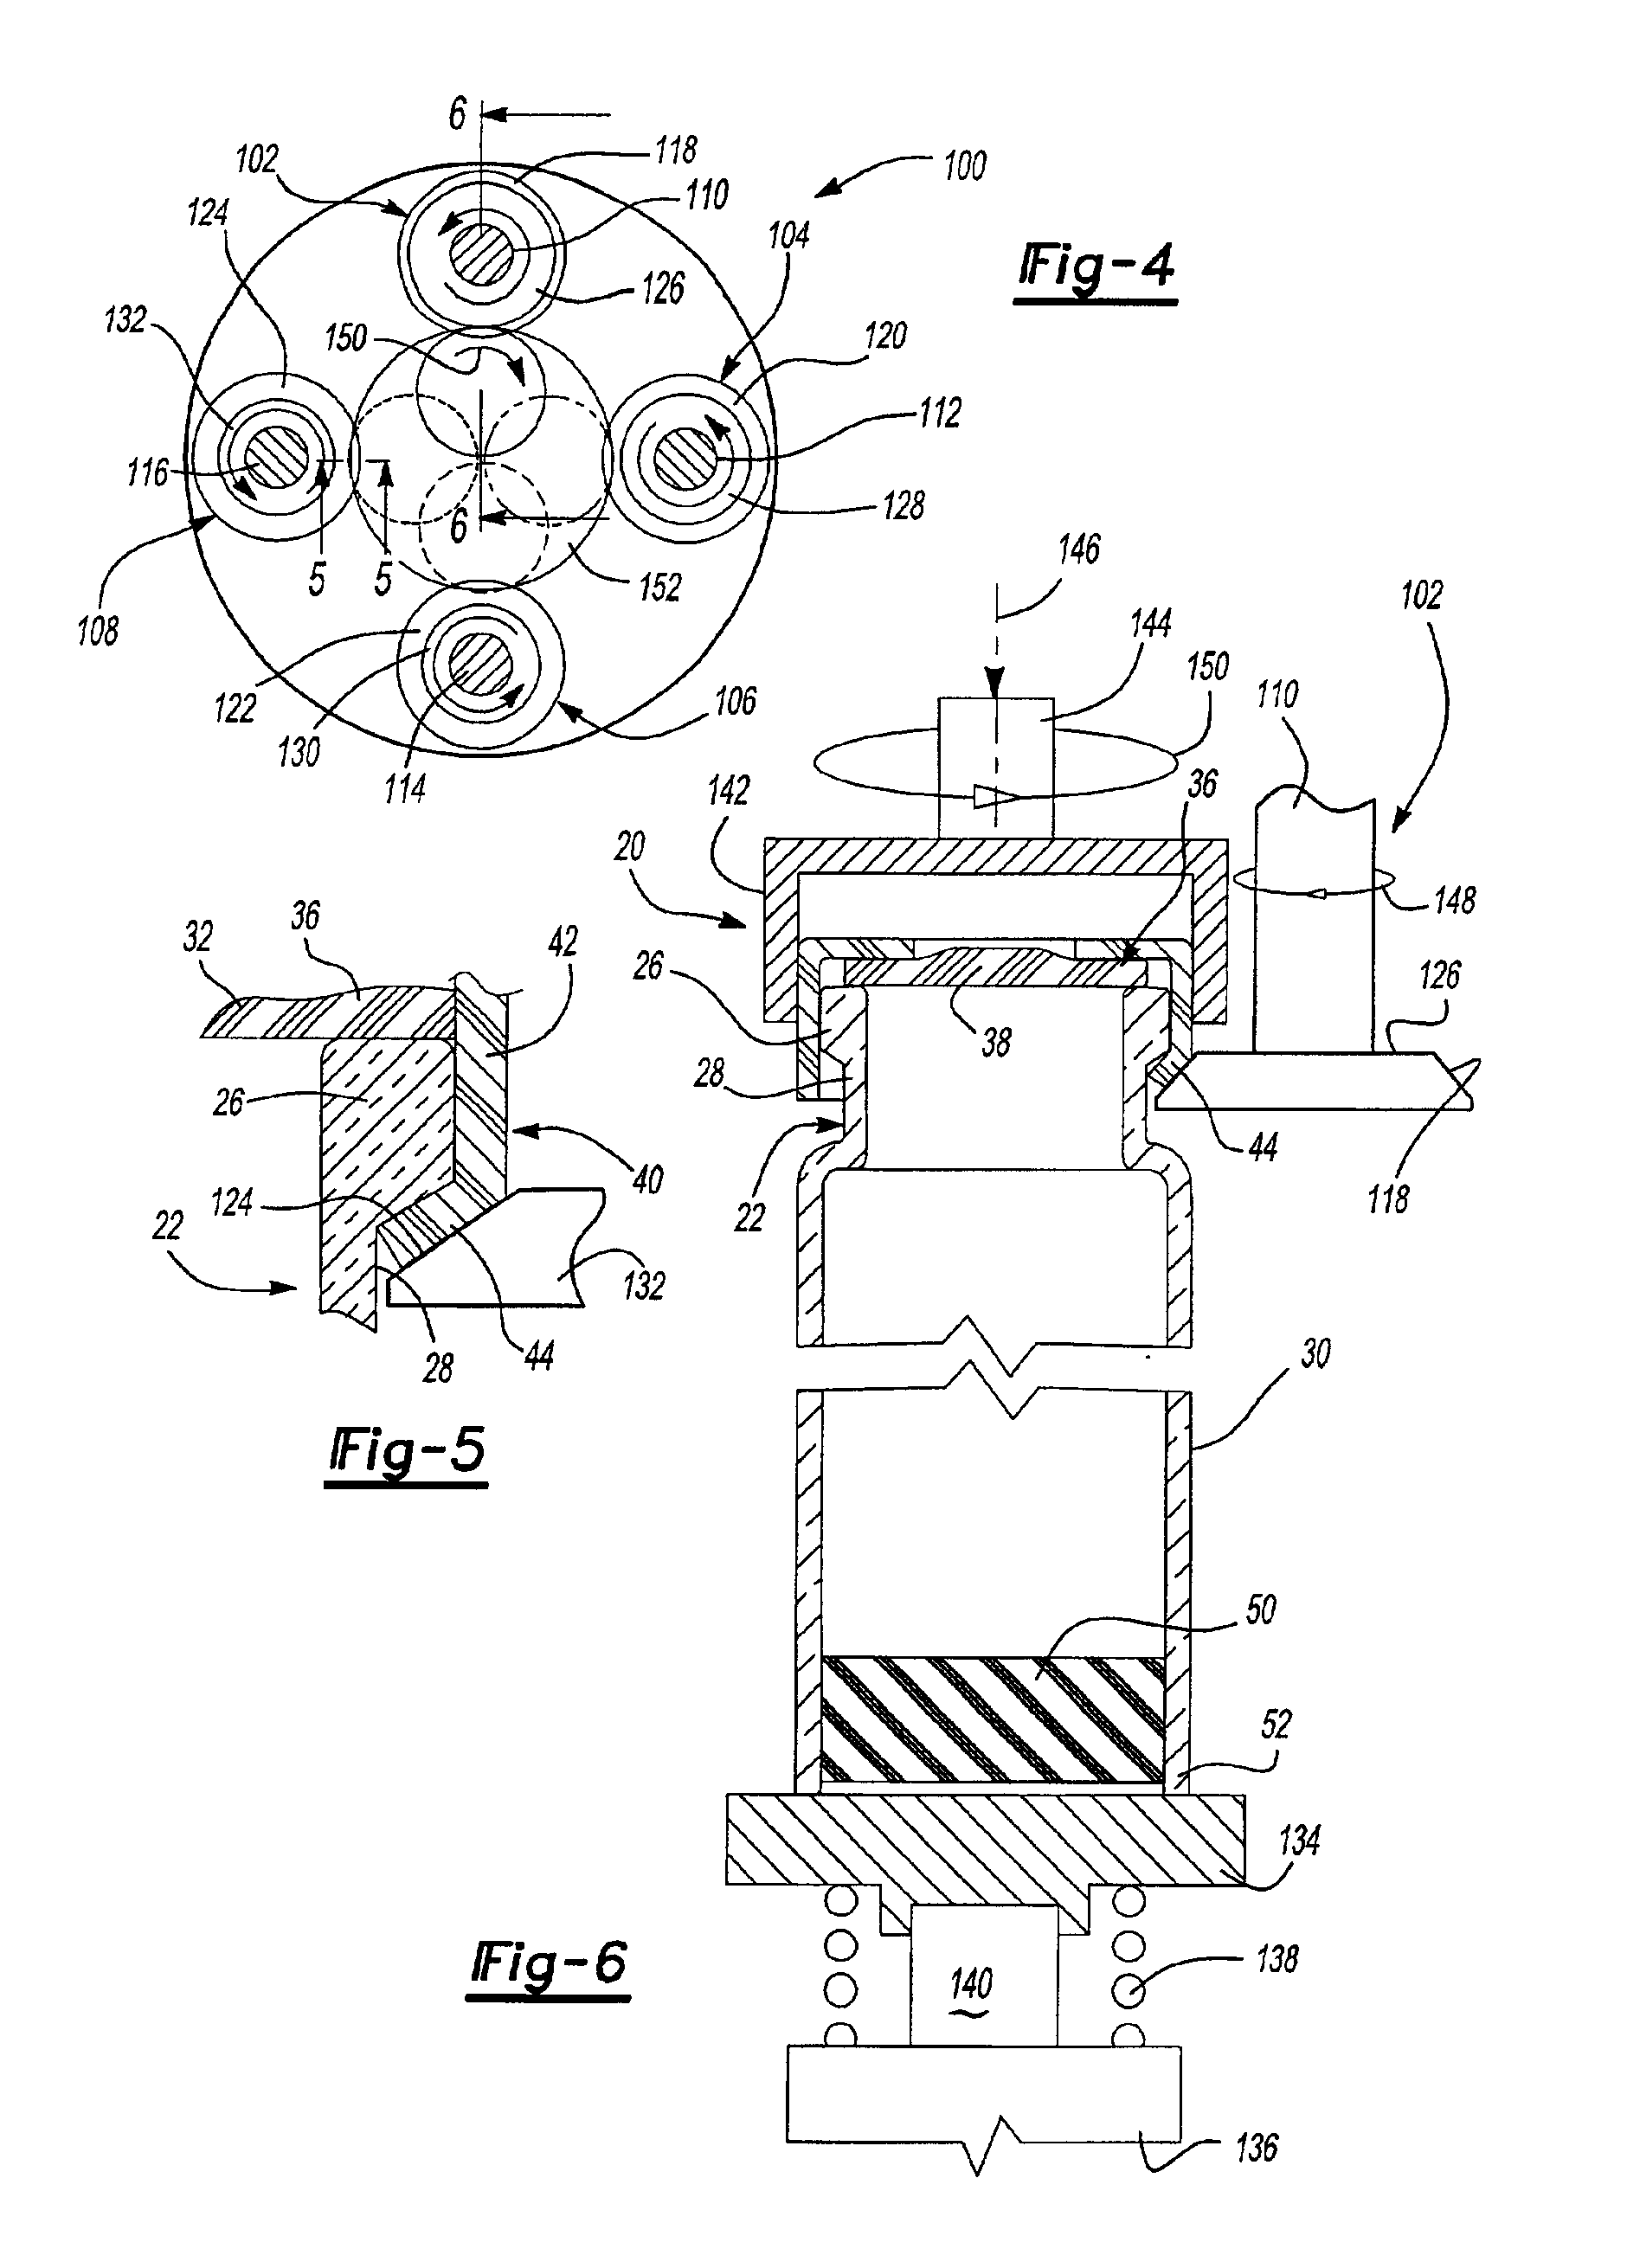 Method of sealing a cartridge or other medical container with a plastic closure